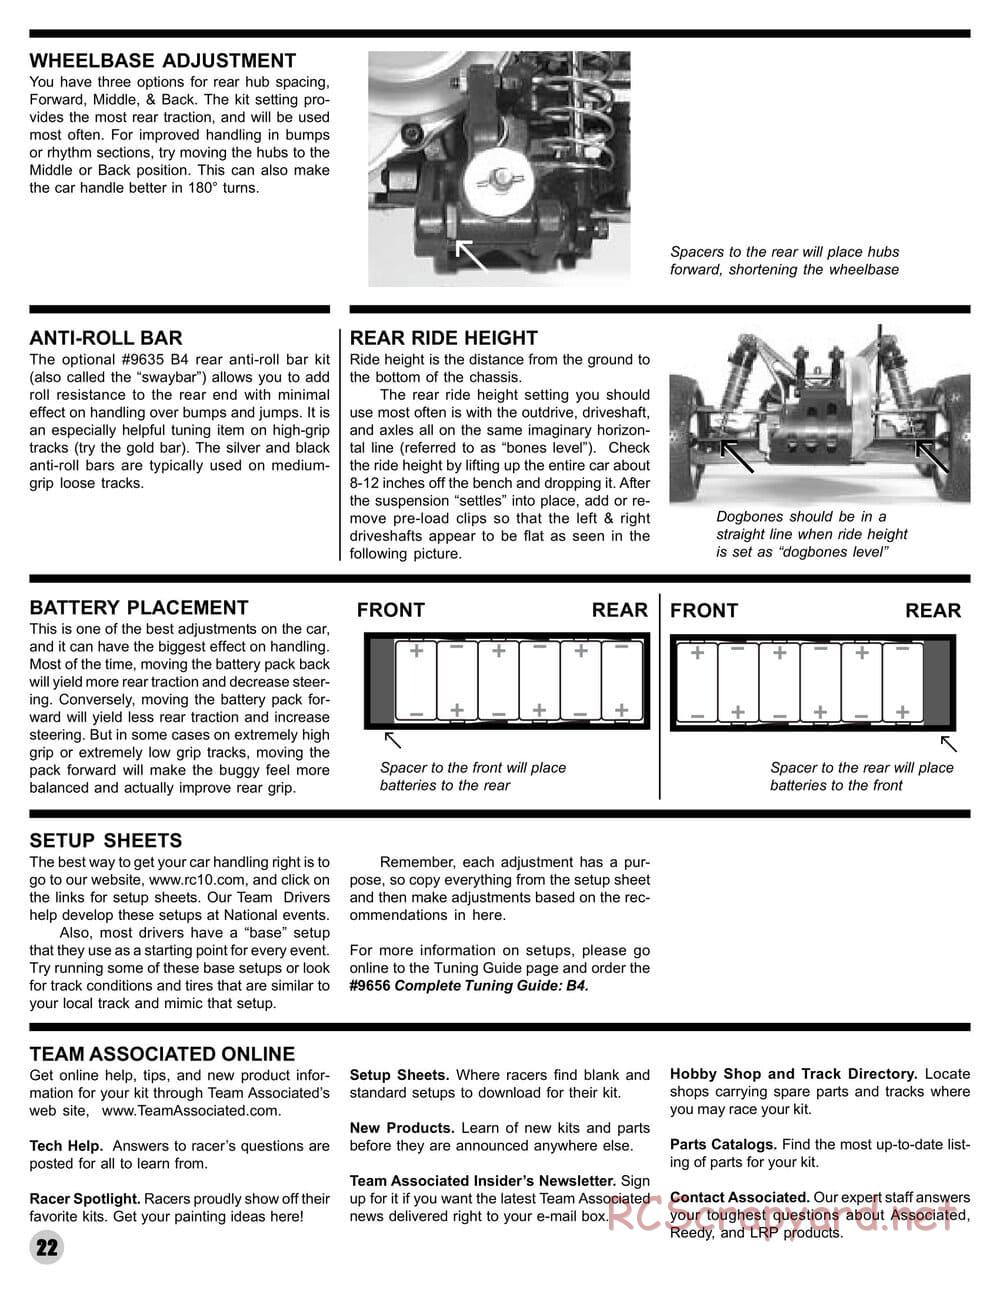 Team Associated - RC10 B4 Factory Team - Manual - Page 20